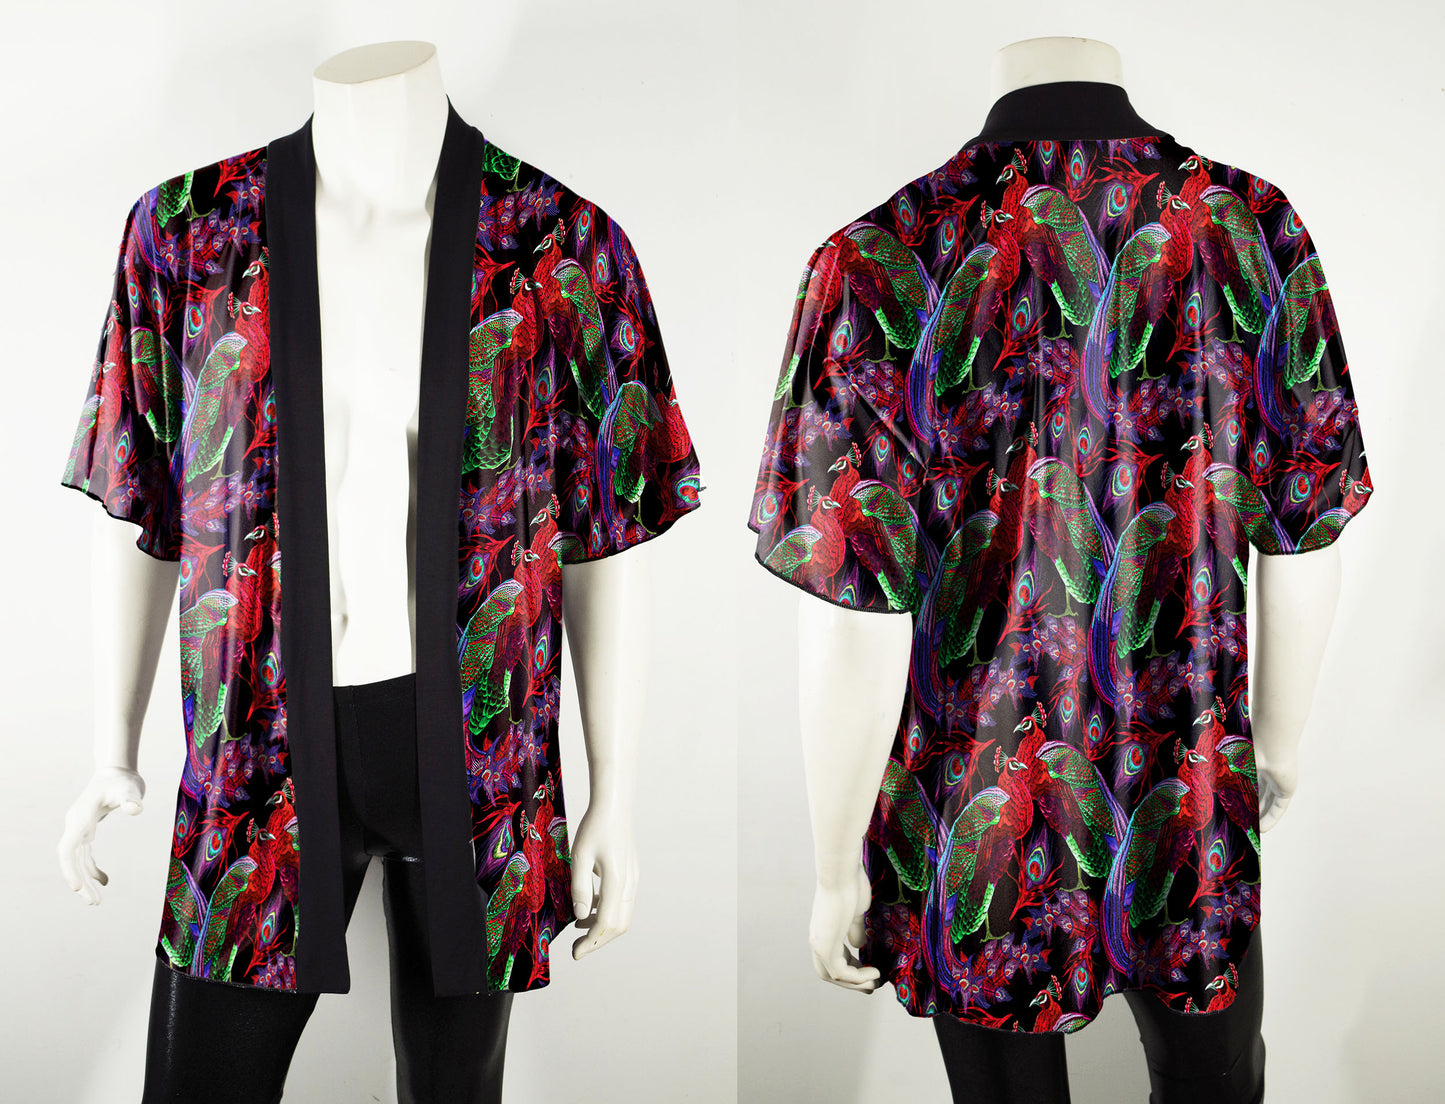 Festival Kimono Mens or Womens with Red Peacock Print